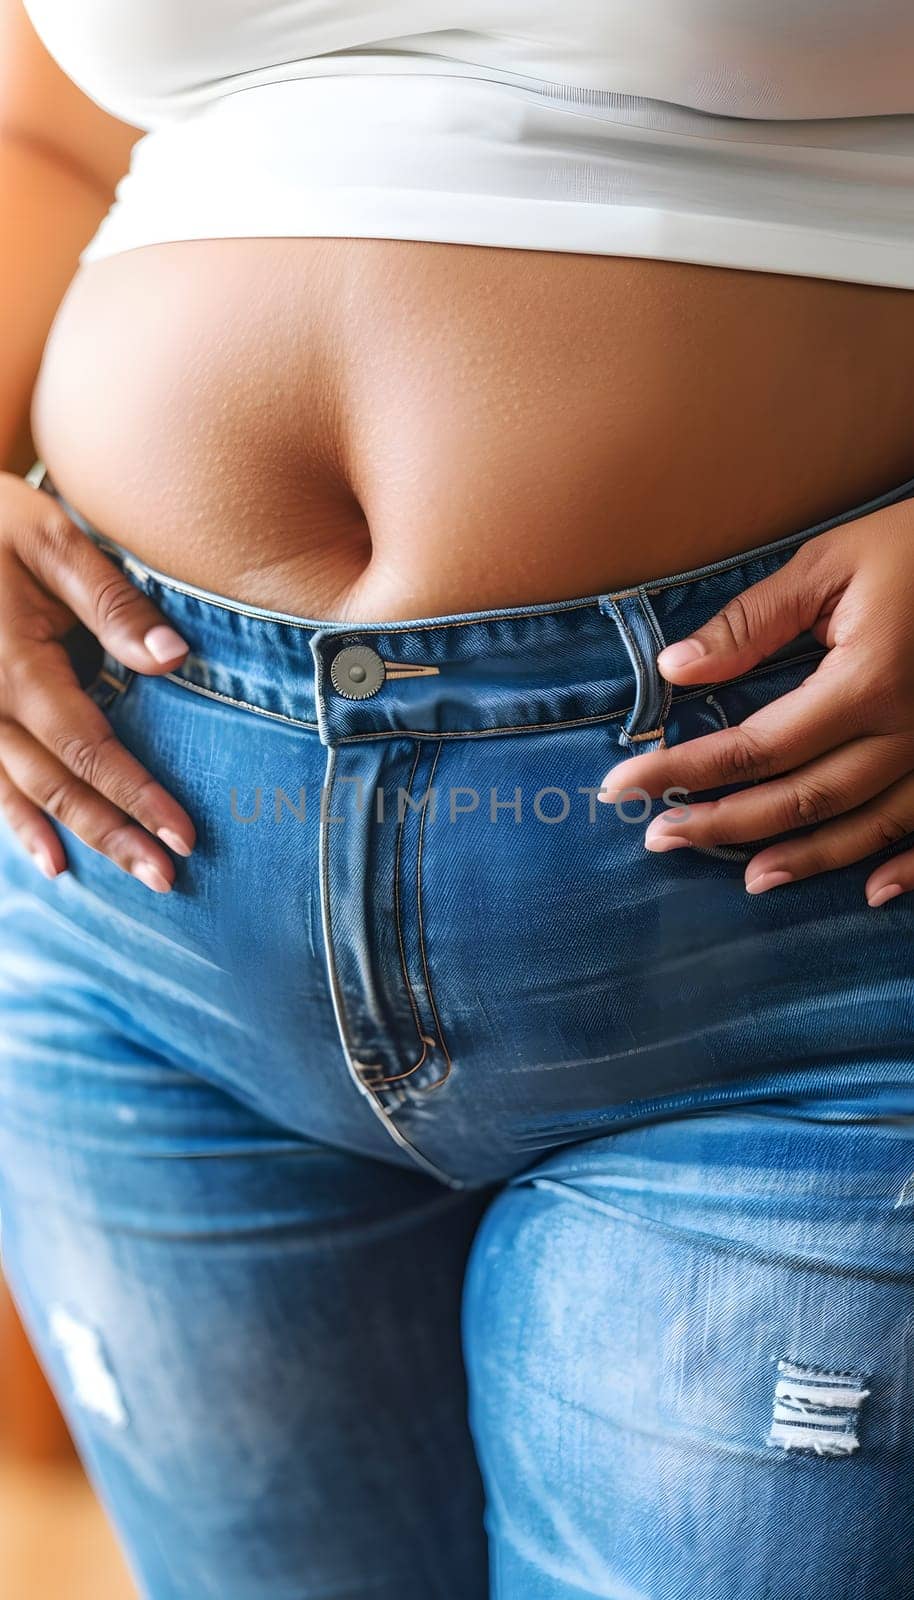 A tight shot of a womans denim jeans wrapped around her waist and thighs, with her hand resting on her abdomen in a relaxed gesture